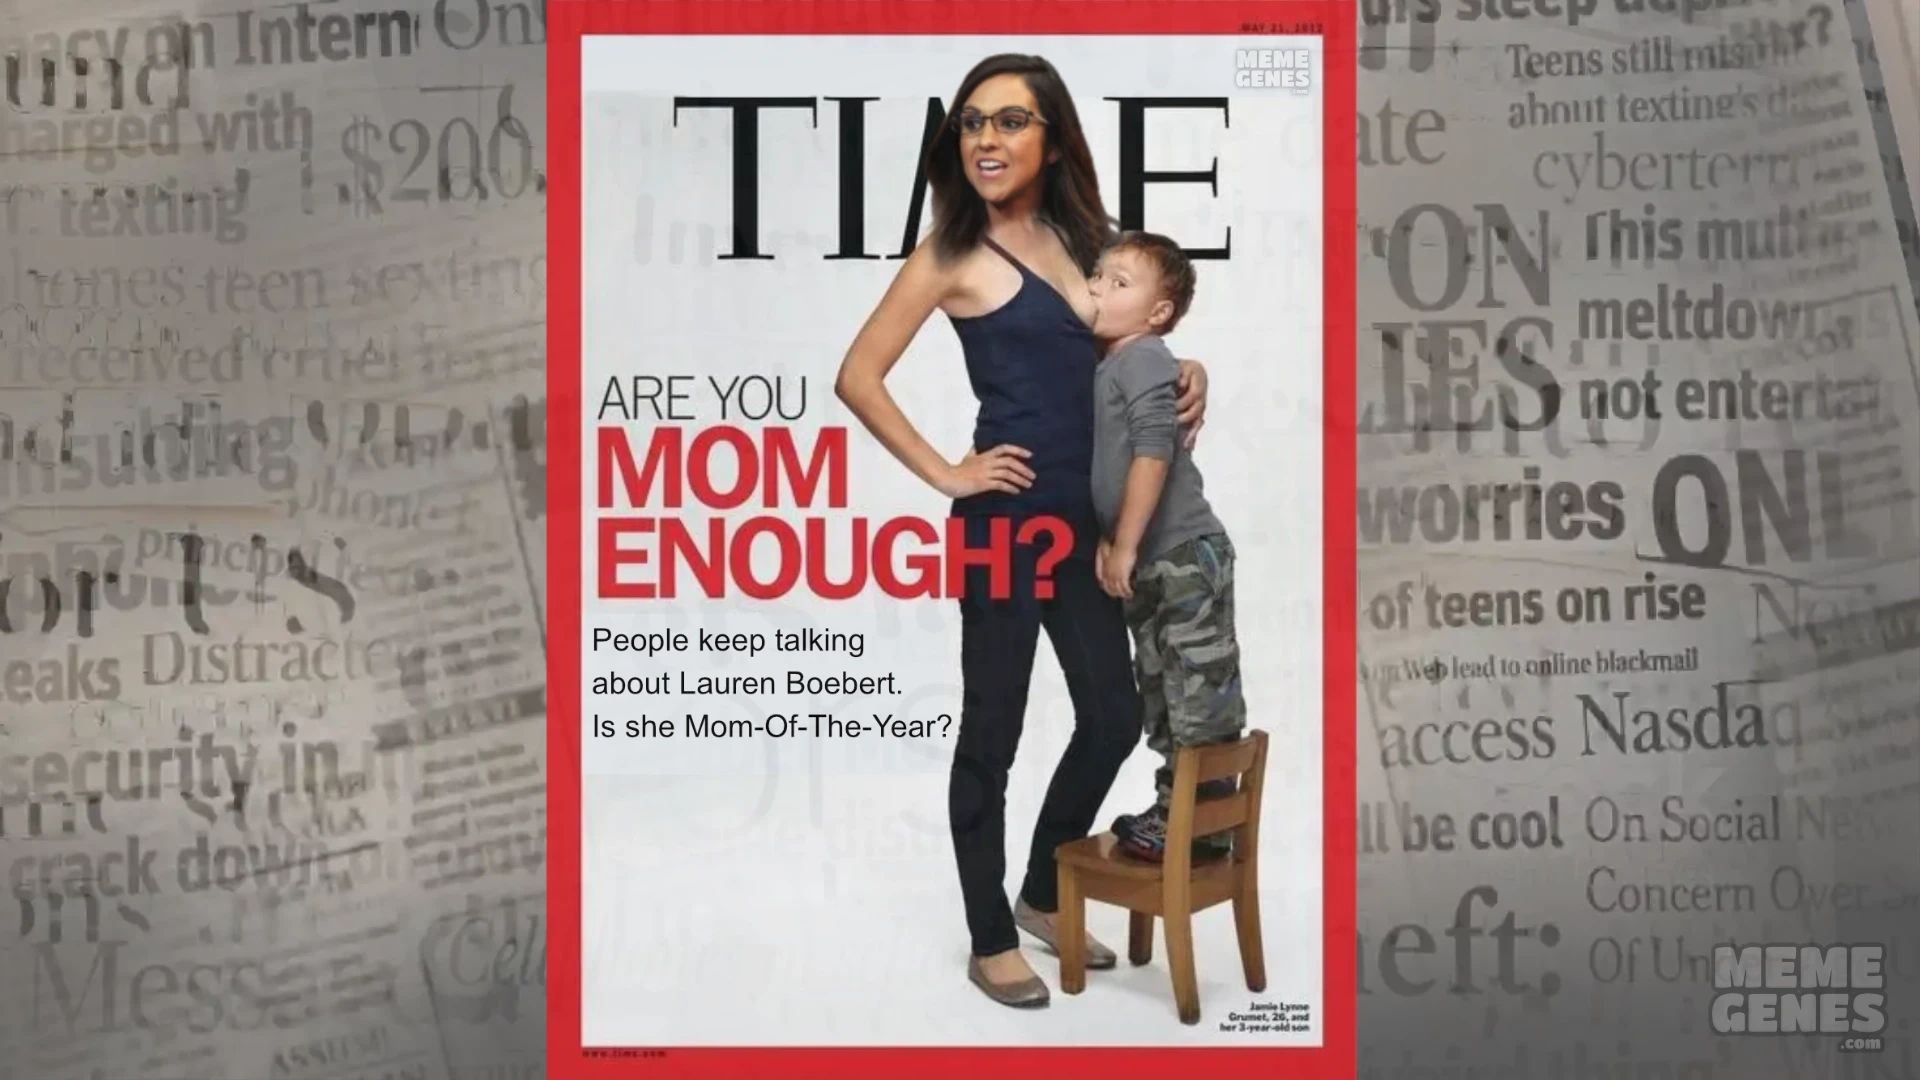 And the award for Mother of the Year goes to Lauren Hoebert! - Featured image